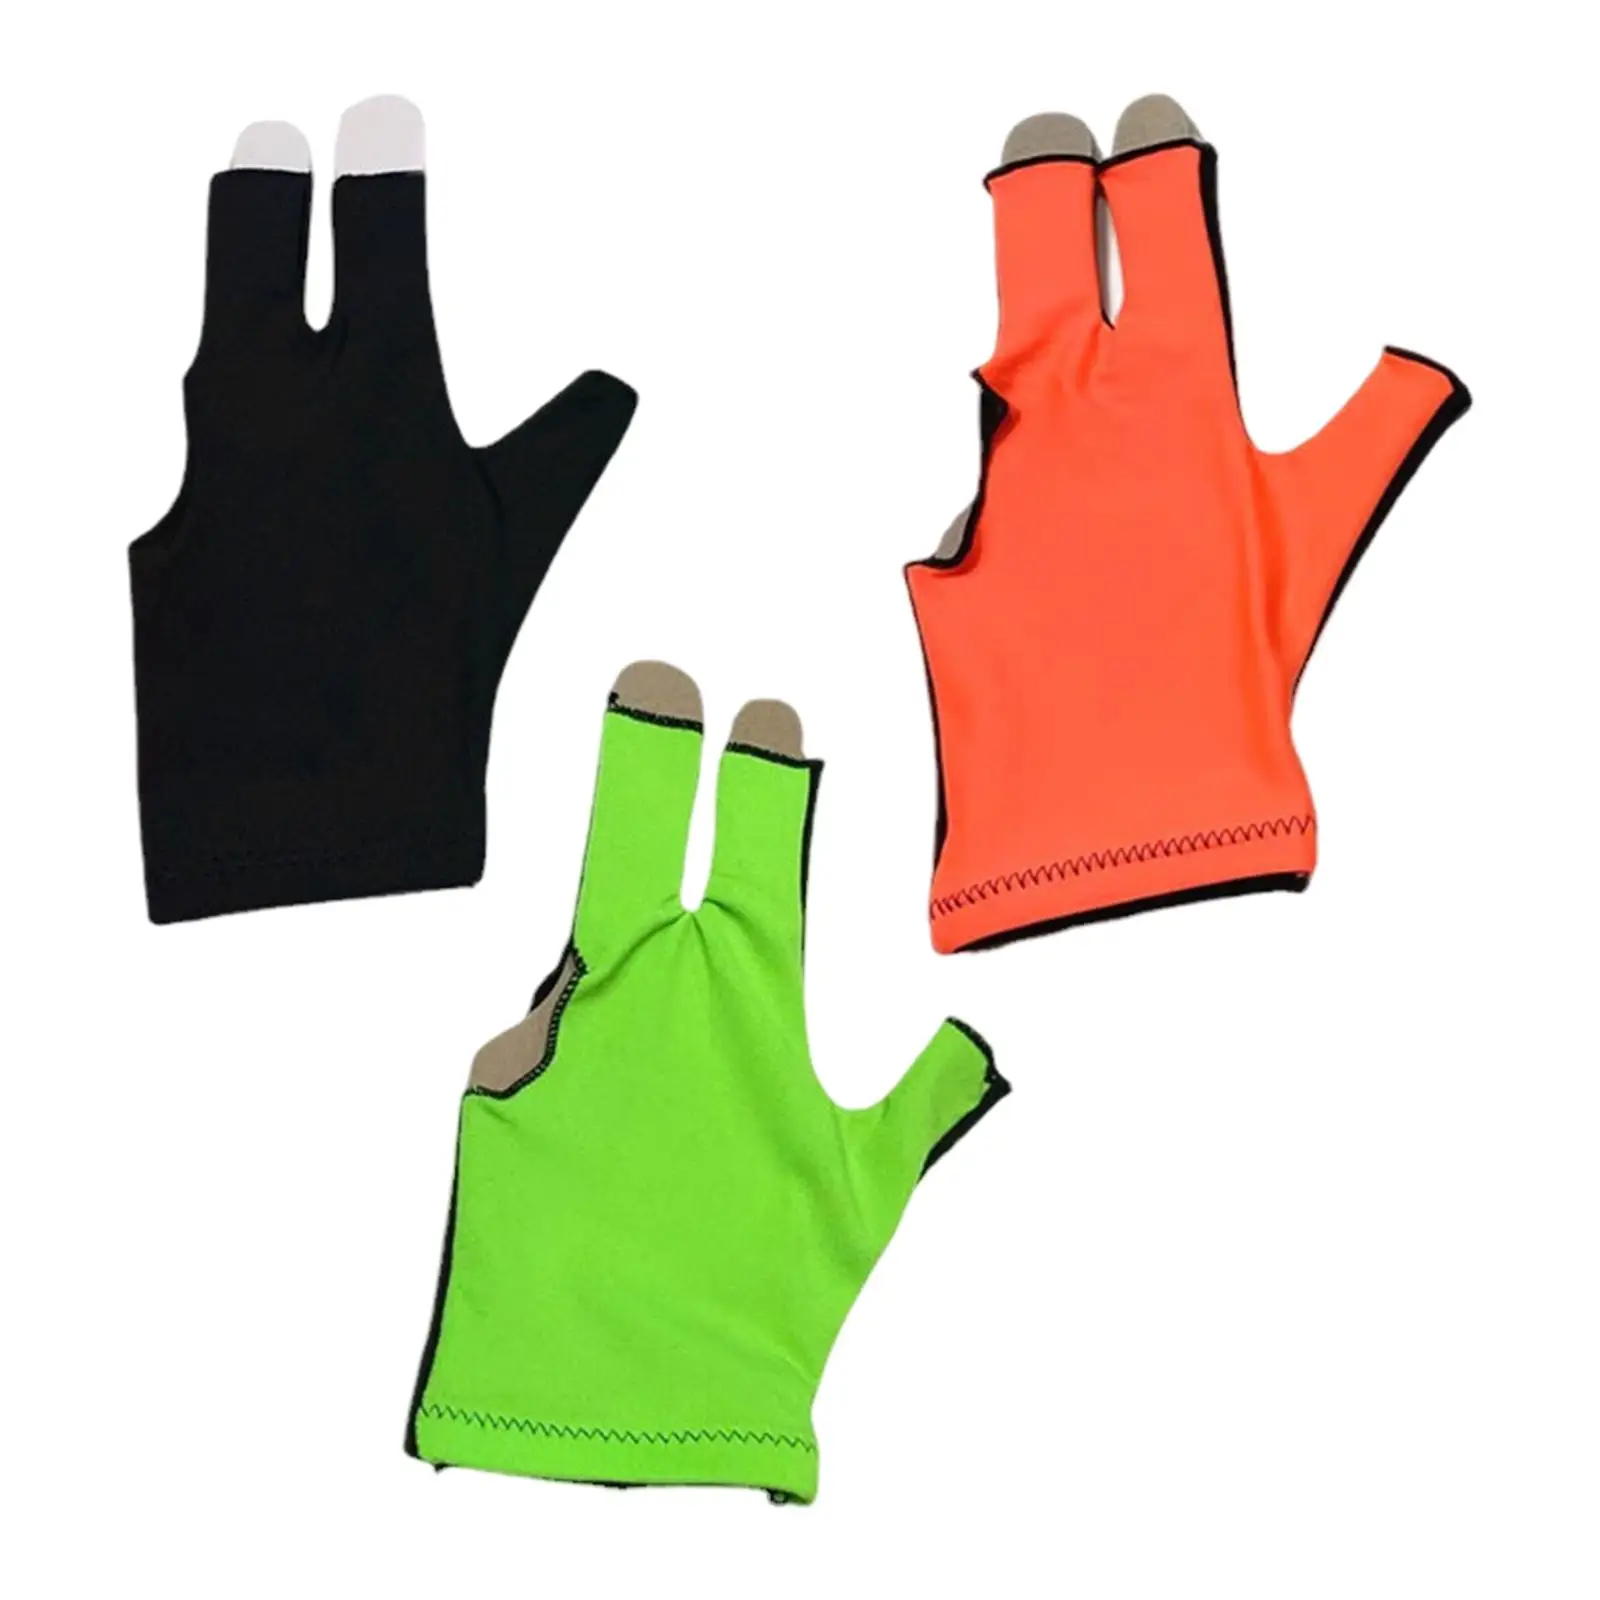 

Open Pool Cue Gloves Universal Nonslip Breathable Three Fingers Billiard Glove Snooker Cue Glove for Indoor Game Training Play